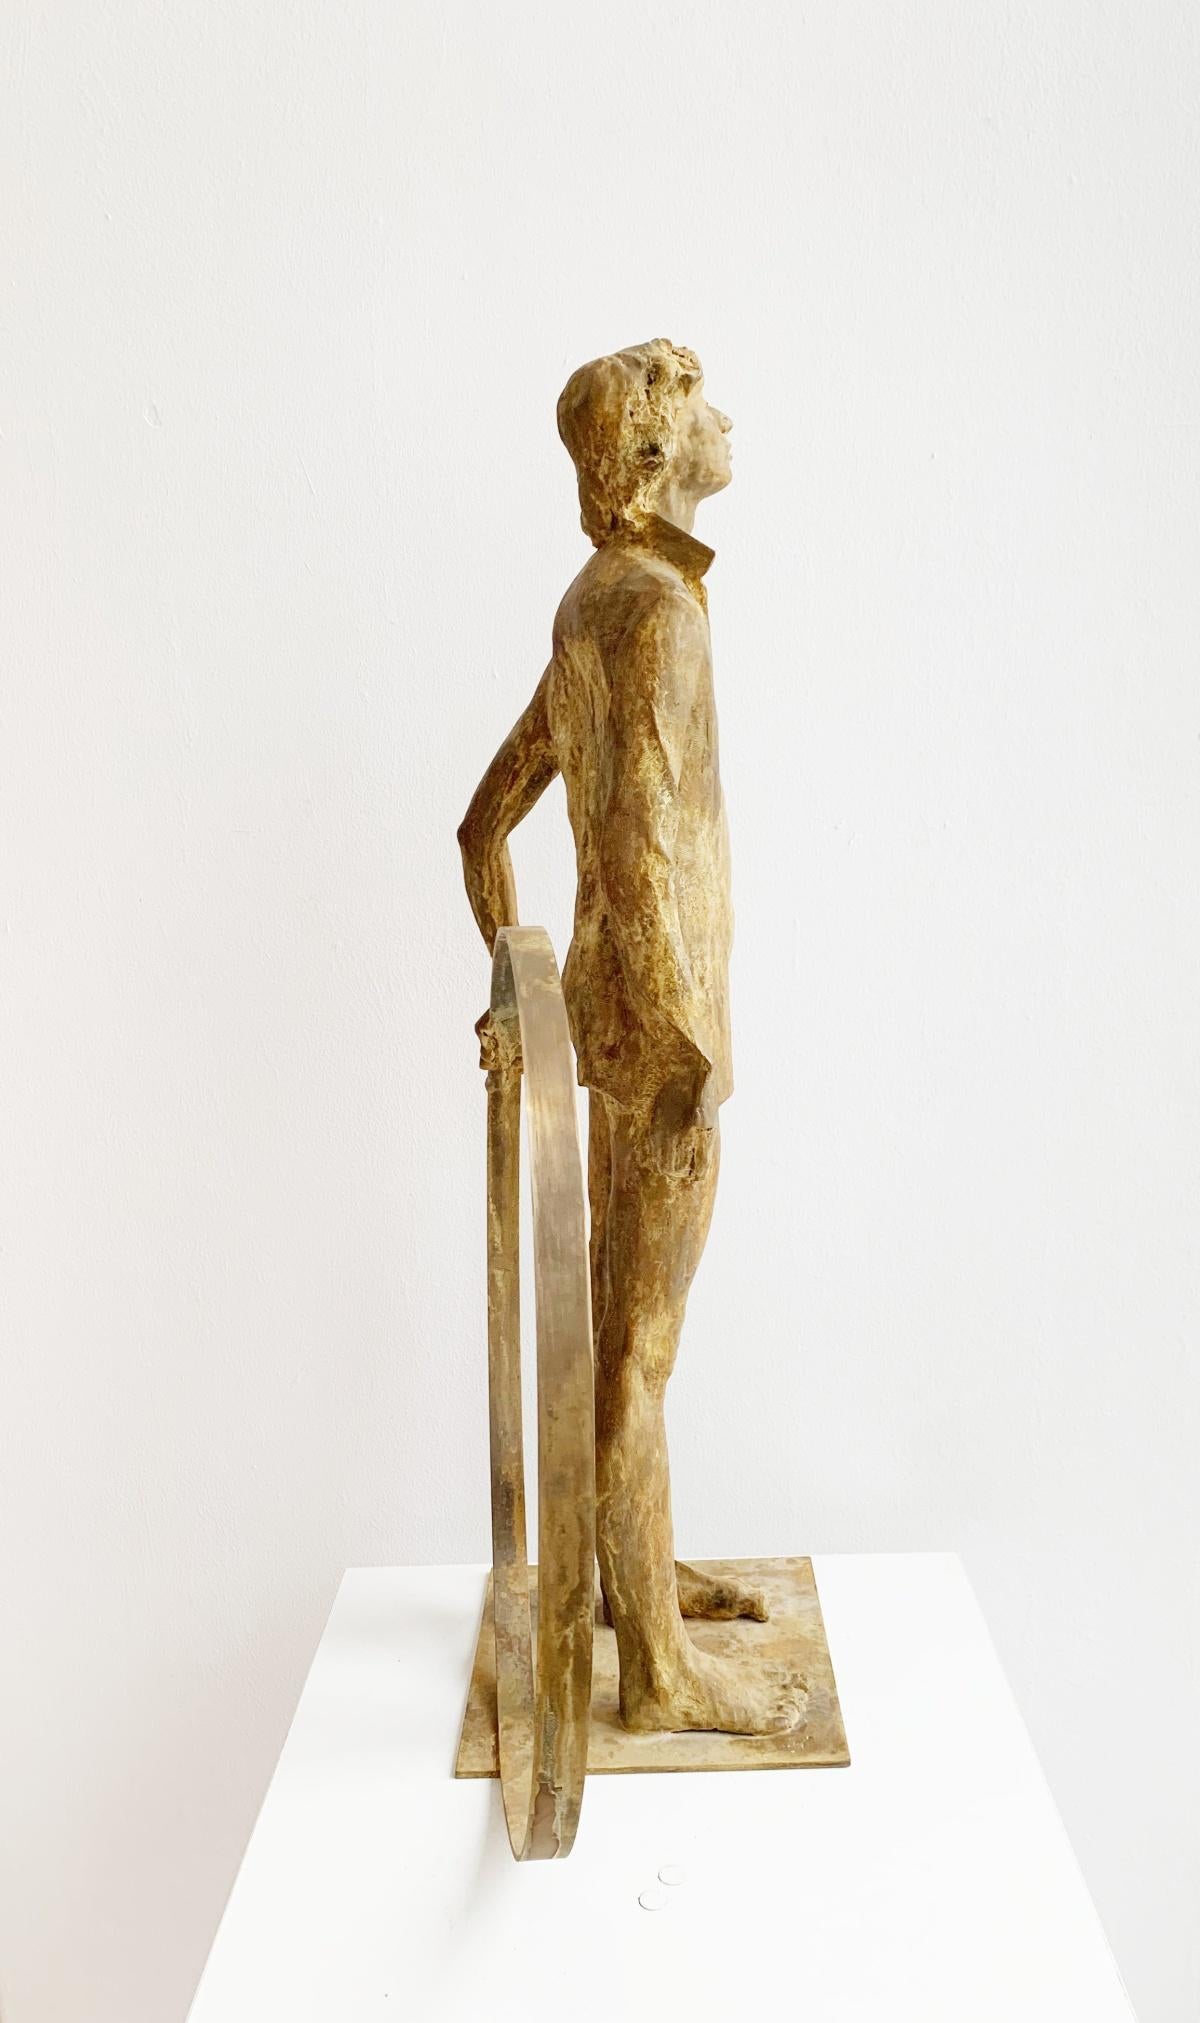 Boy with a hoop. Figurative bronze sculpture, Polish art, Limited edition 1